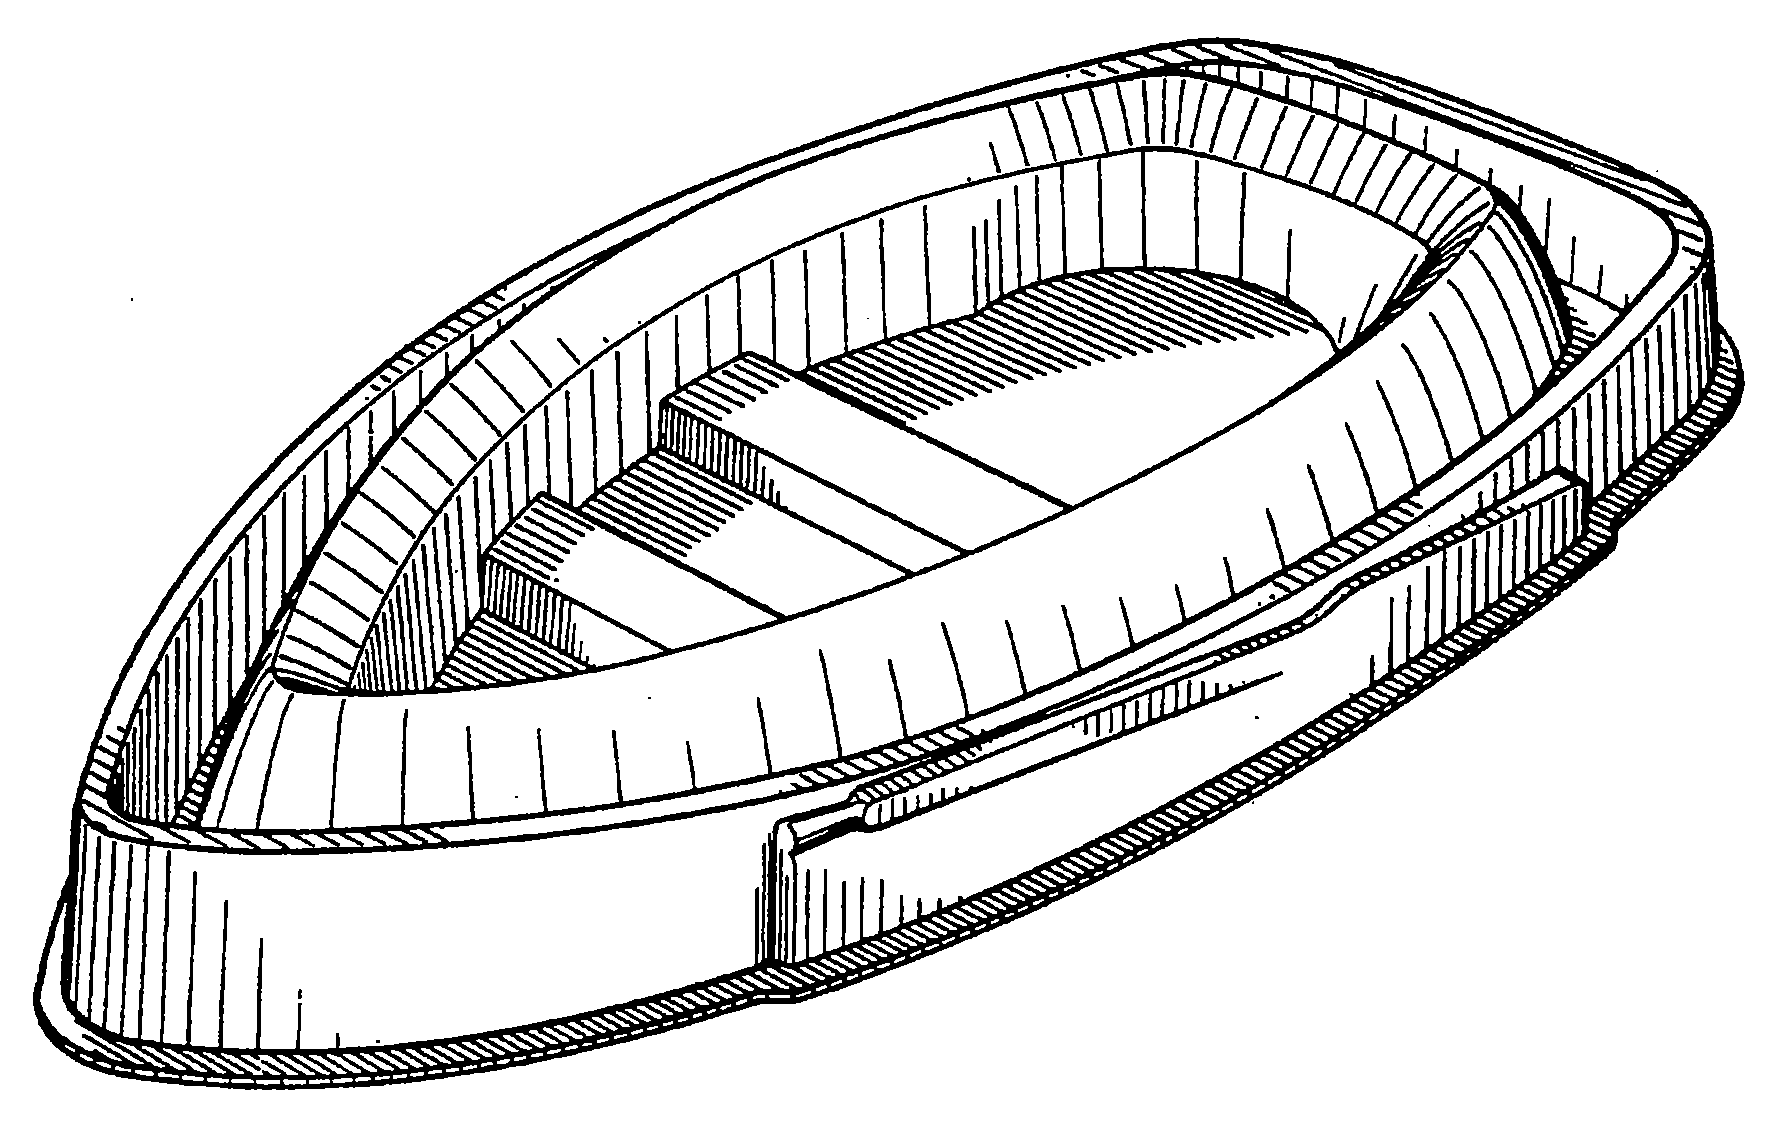 Example of a design for a compartmented tray with a simulativeconfiguration.  
